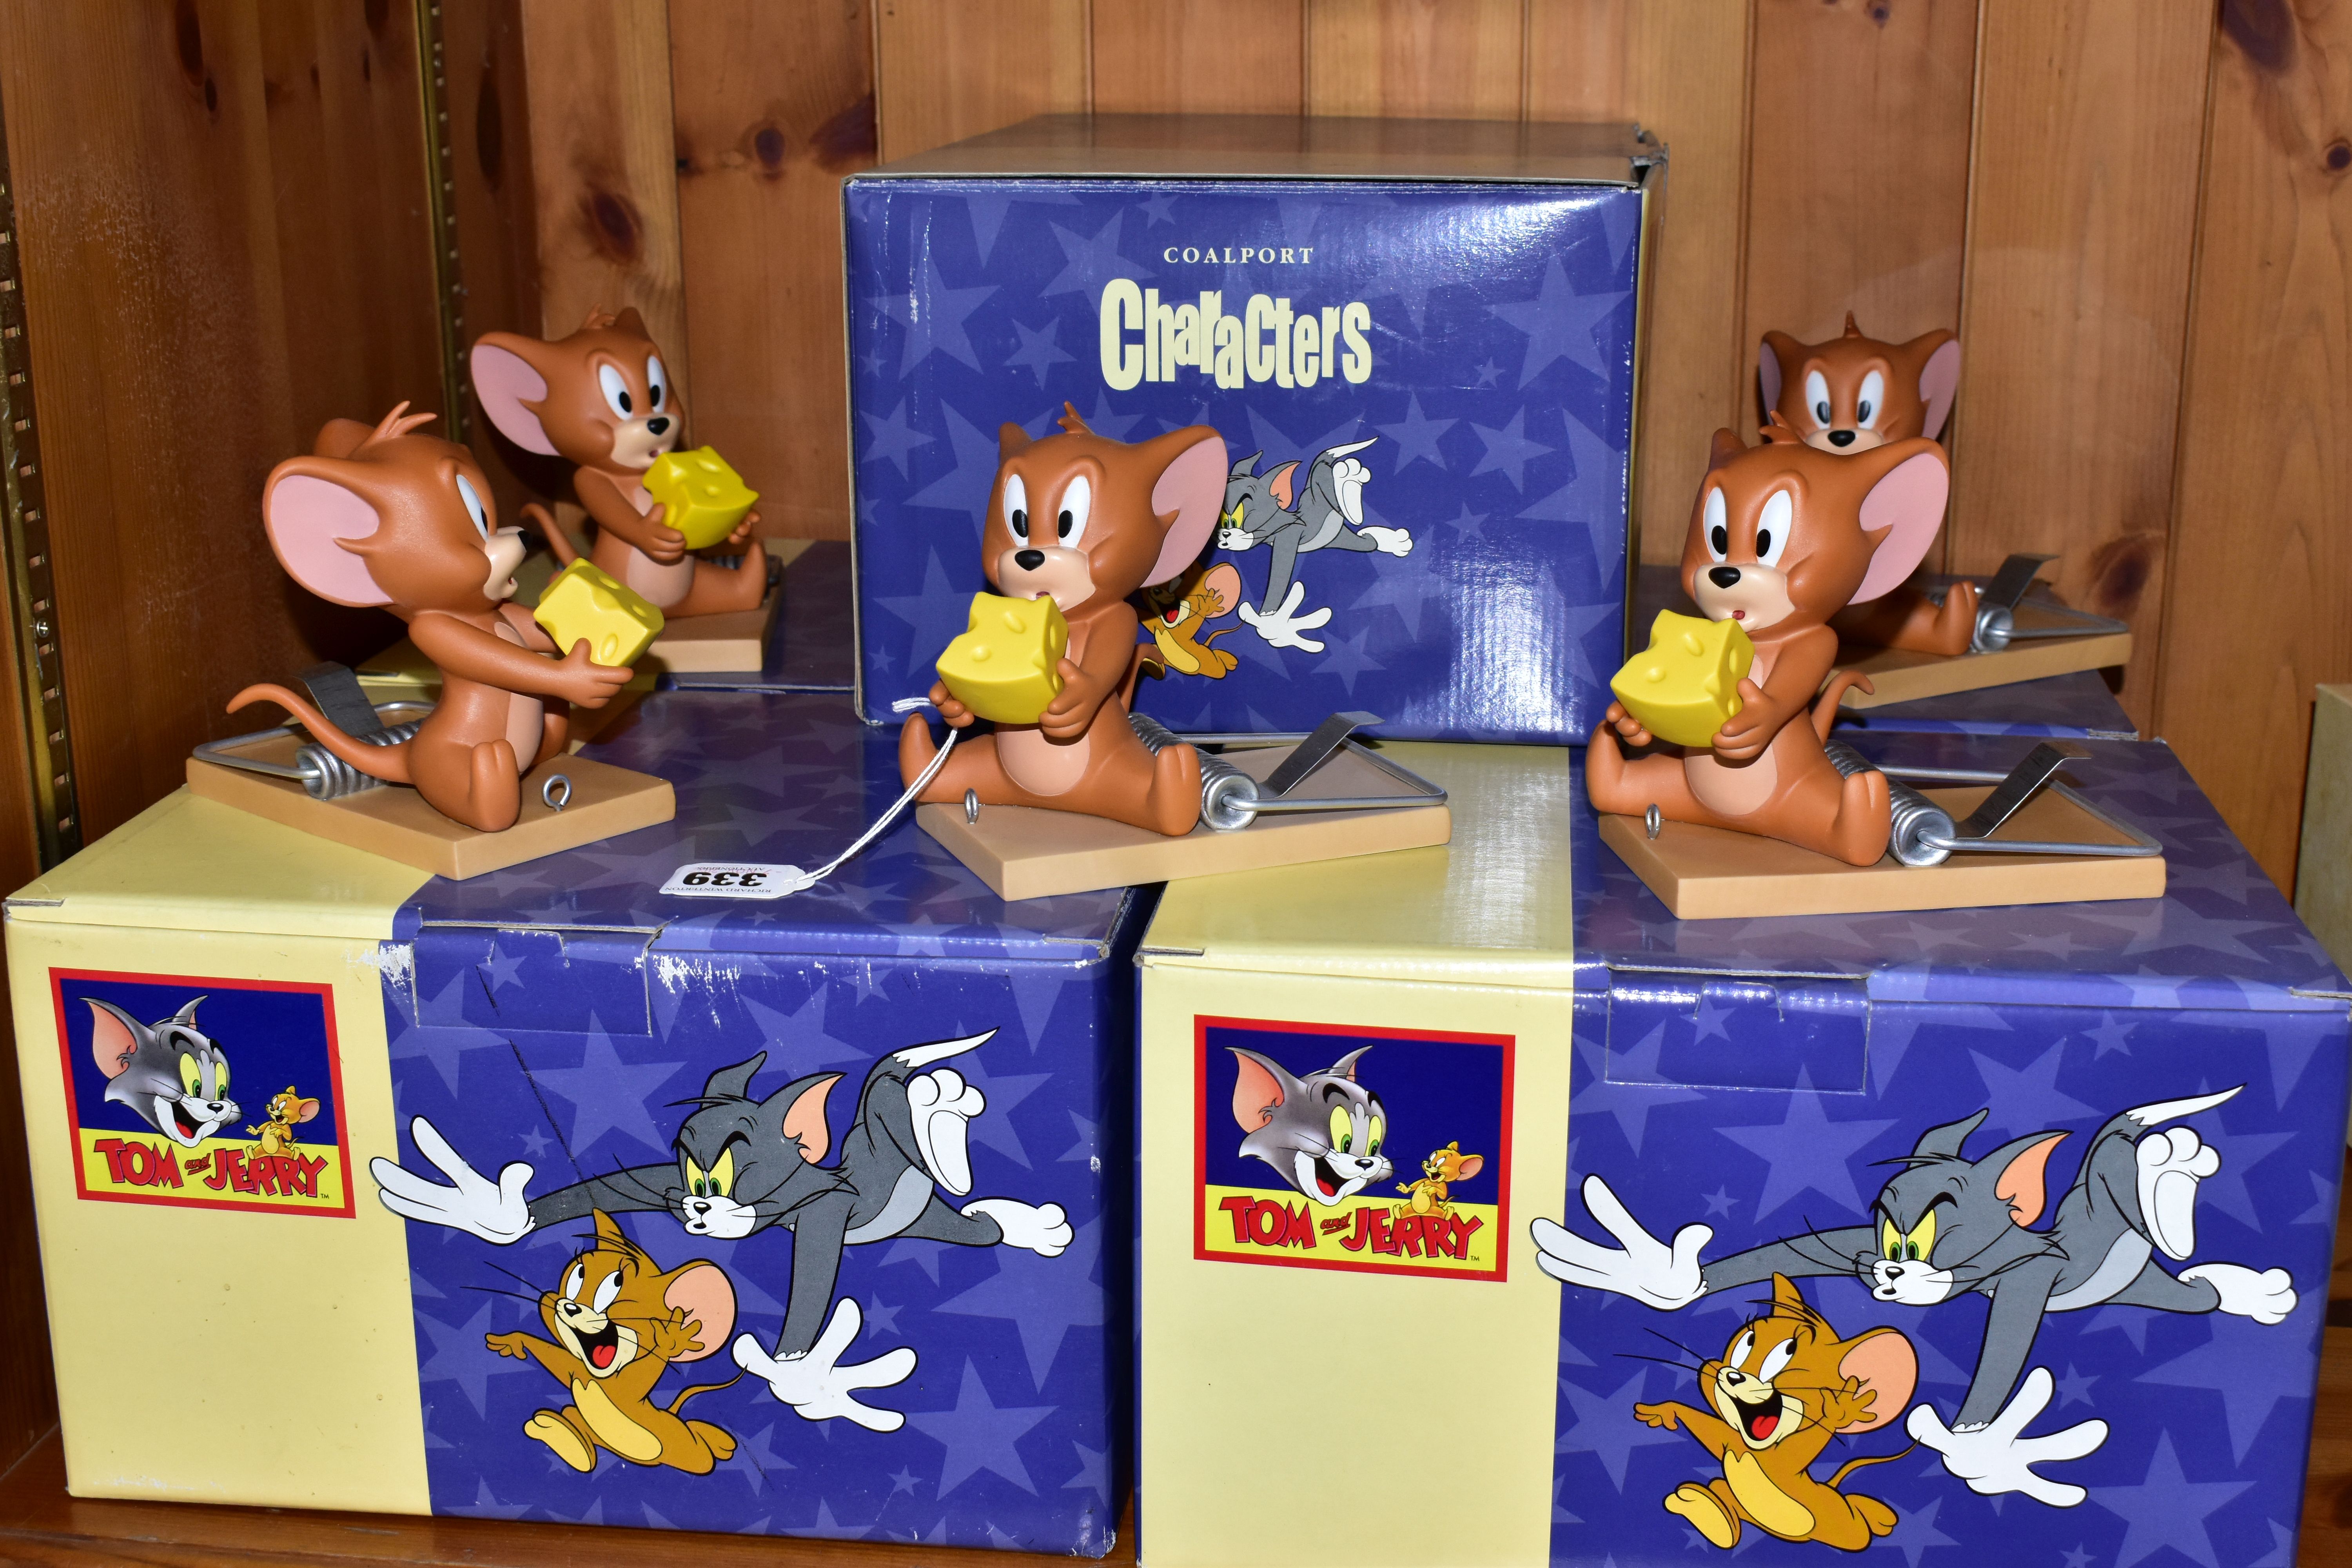 FIVE BOXED COALPORT CHARACTERS FIGURES, 'The Mousetrap' depicting Jerry from the Tom and Jerry